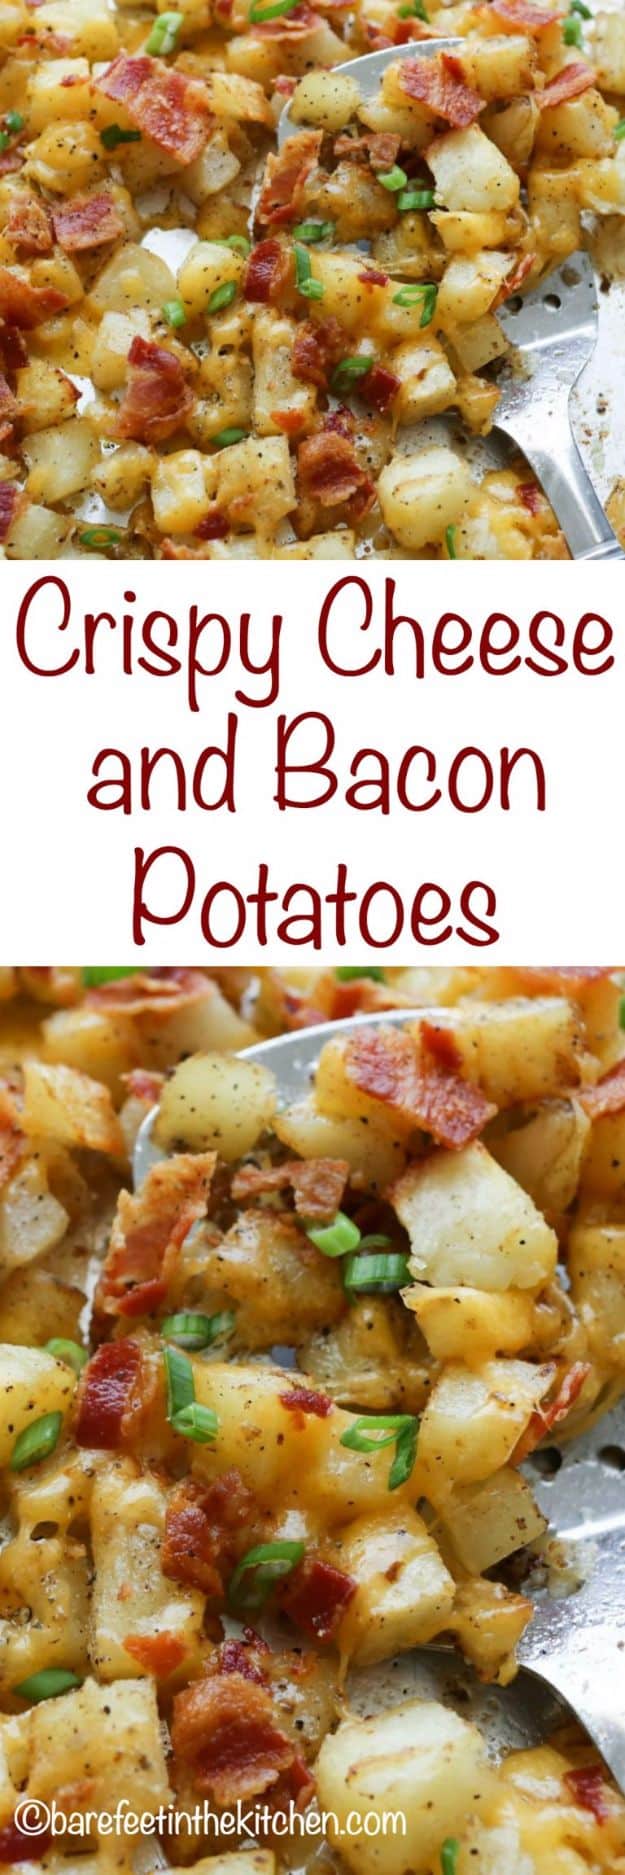 Potato Recipes - Crispy Cheese and Bacon Potatoes - Easy, Quick and Healthy Potato Recipes - How To Make Roasted, In Oven, Fried, Mashed and Red Potatoes - Easy Potato Side Dishes #potatorecipes #recipes